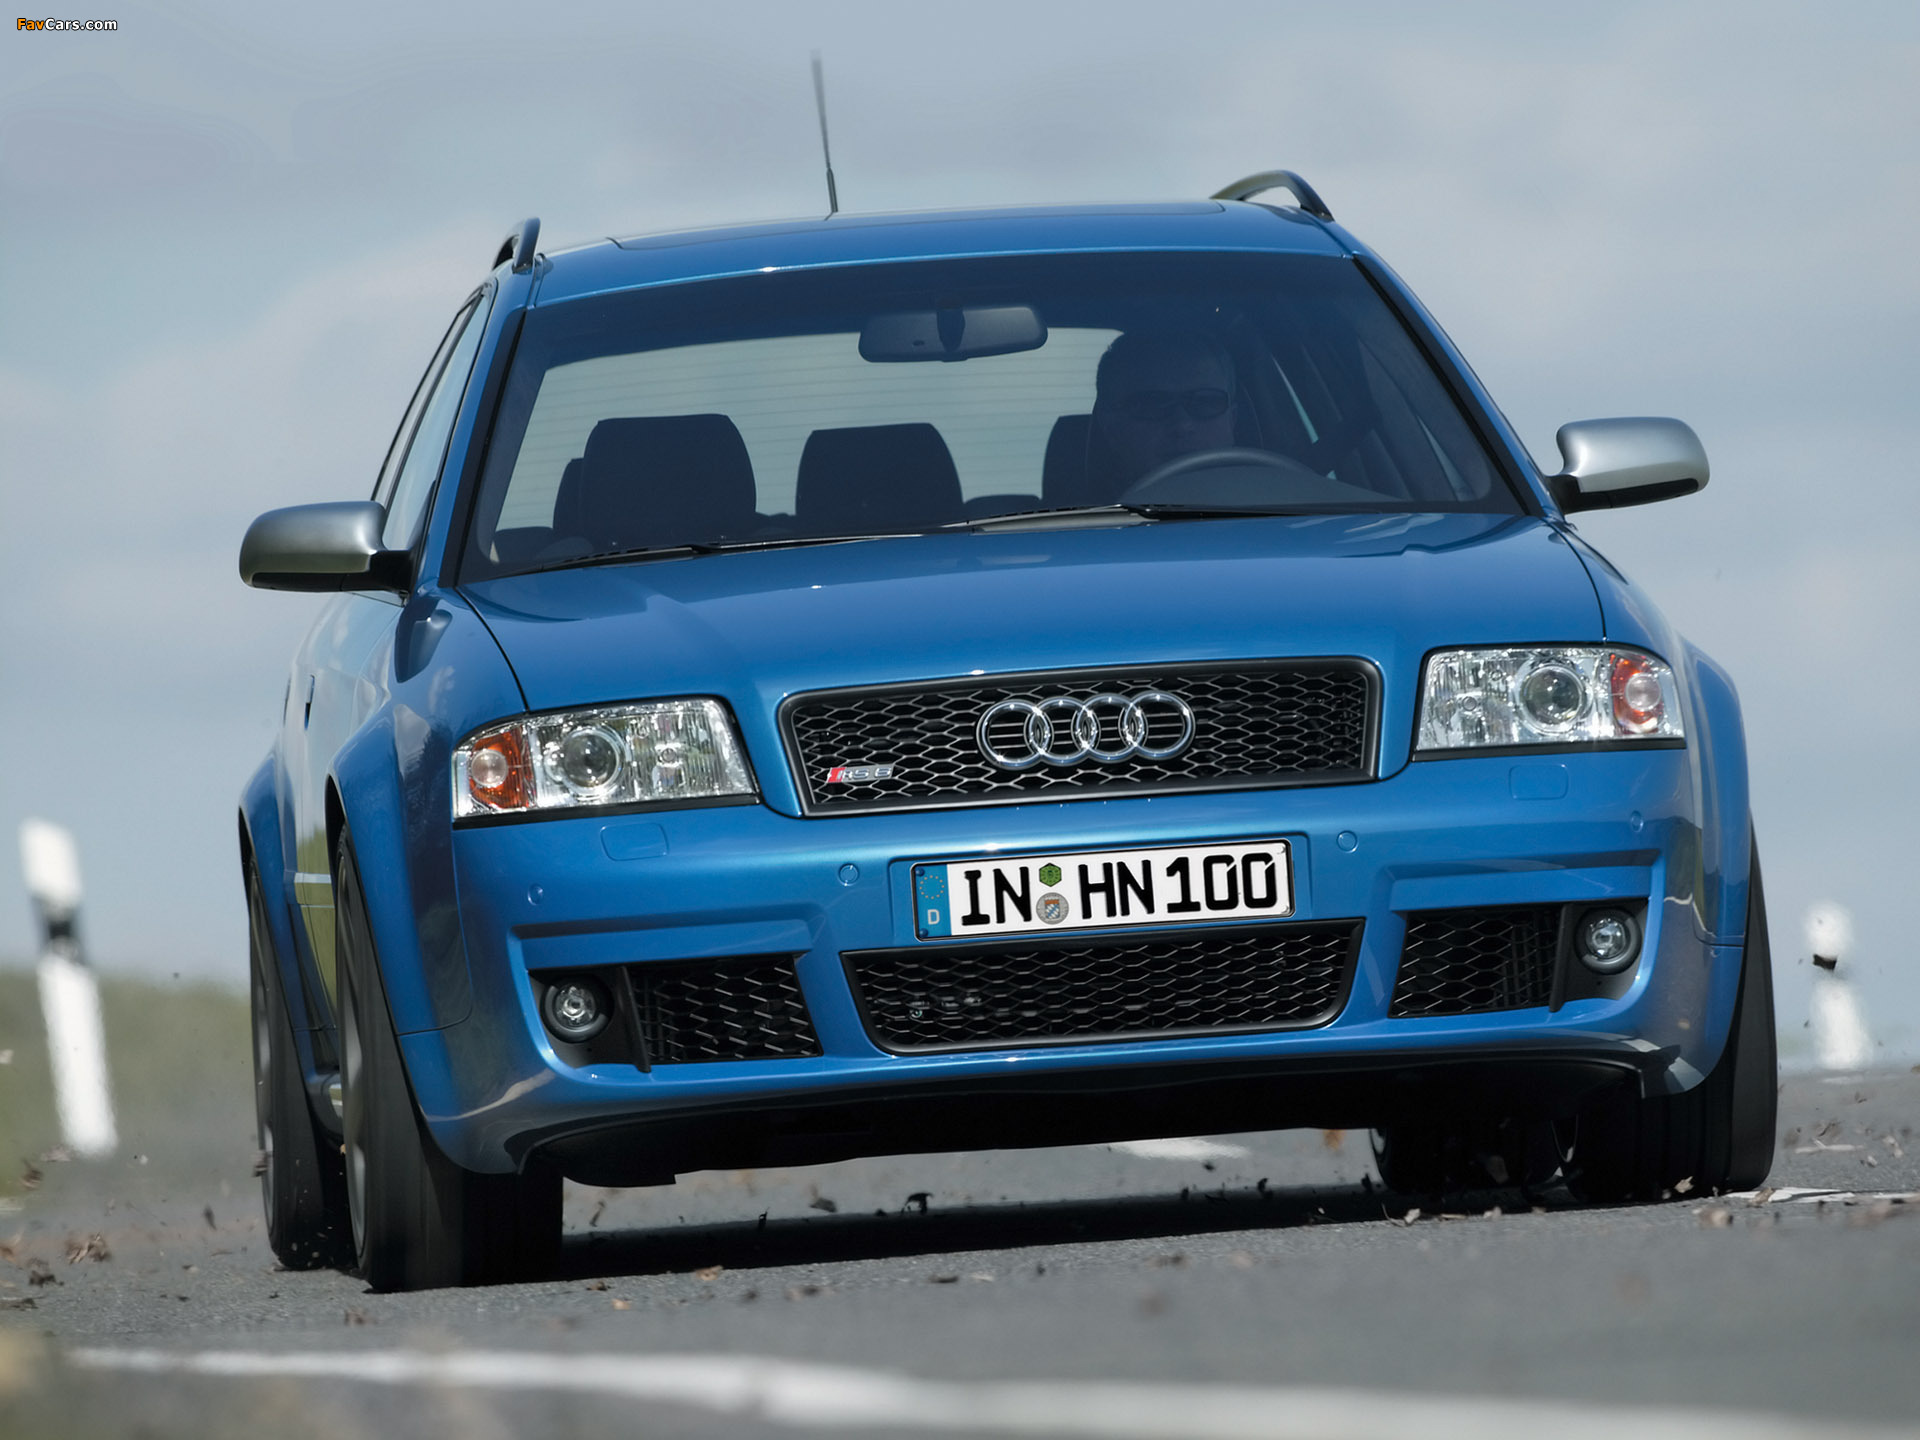 6 c 04. Audi rs6 c5. Ауди rs6 c5 avant. Audi a6 rs6 c5. Audi rs6 2002.